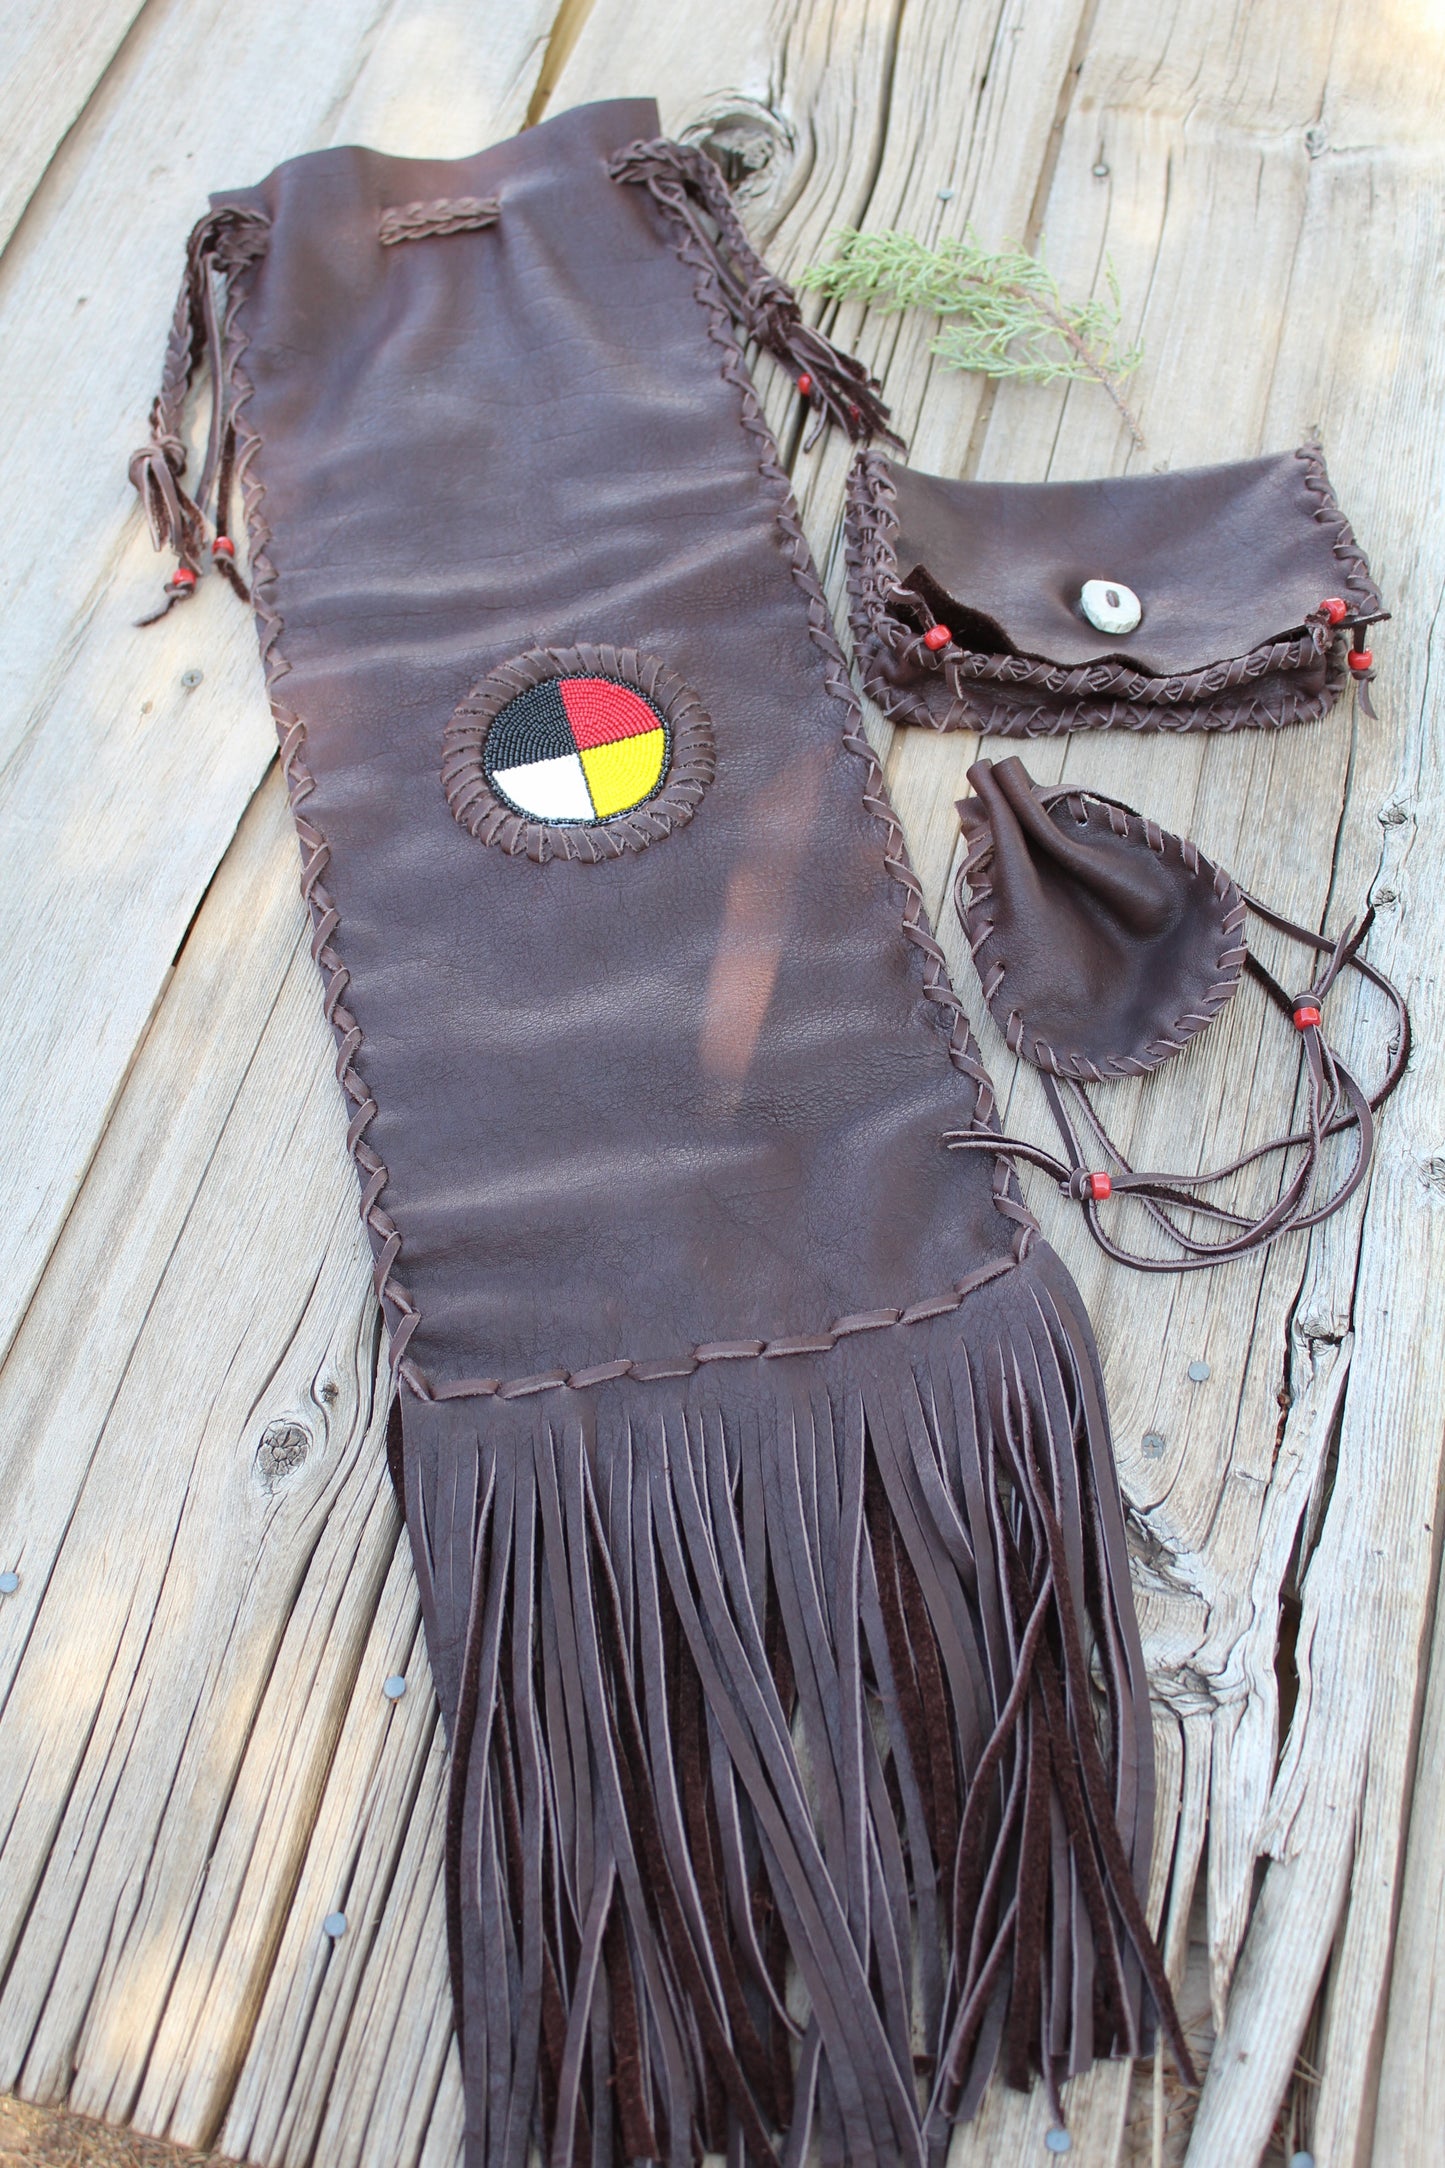 Buffalo leather pipe bag set, four directions beadwork